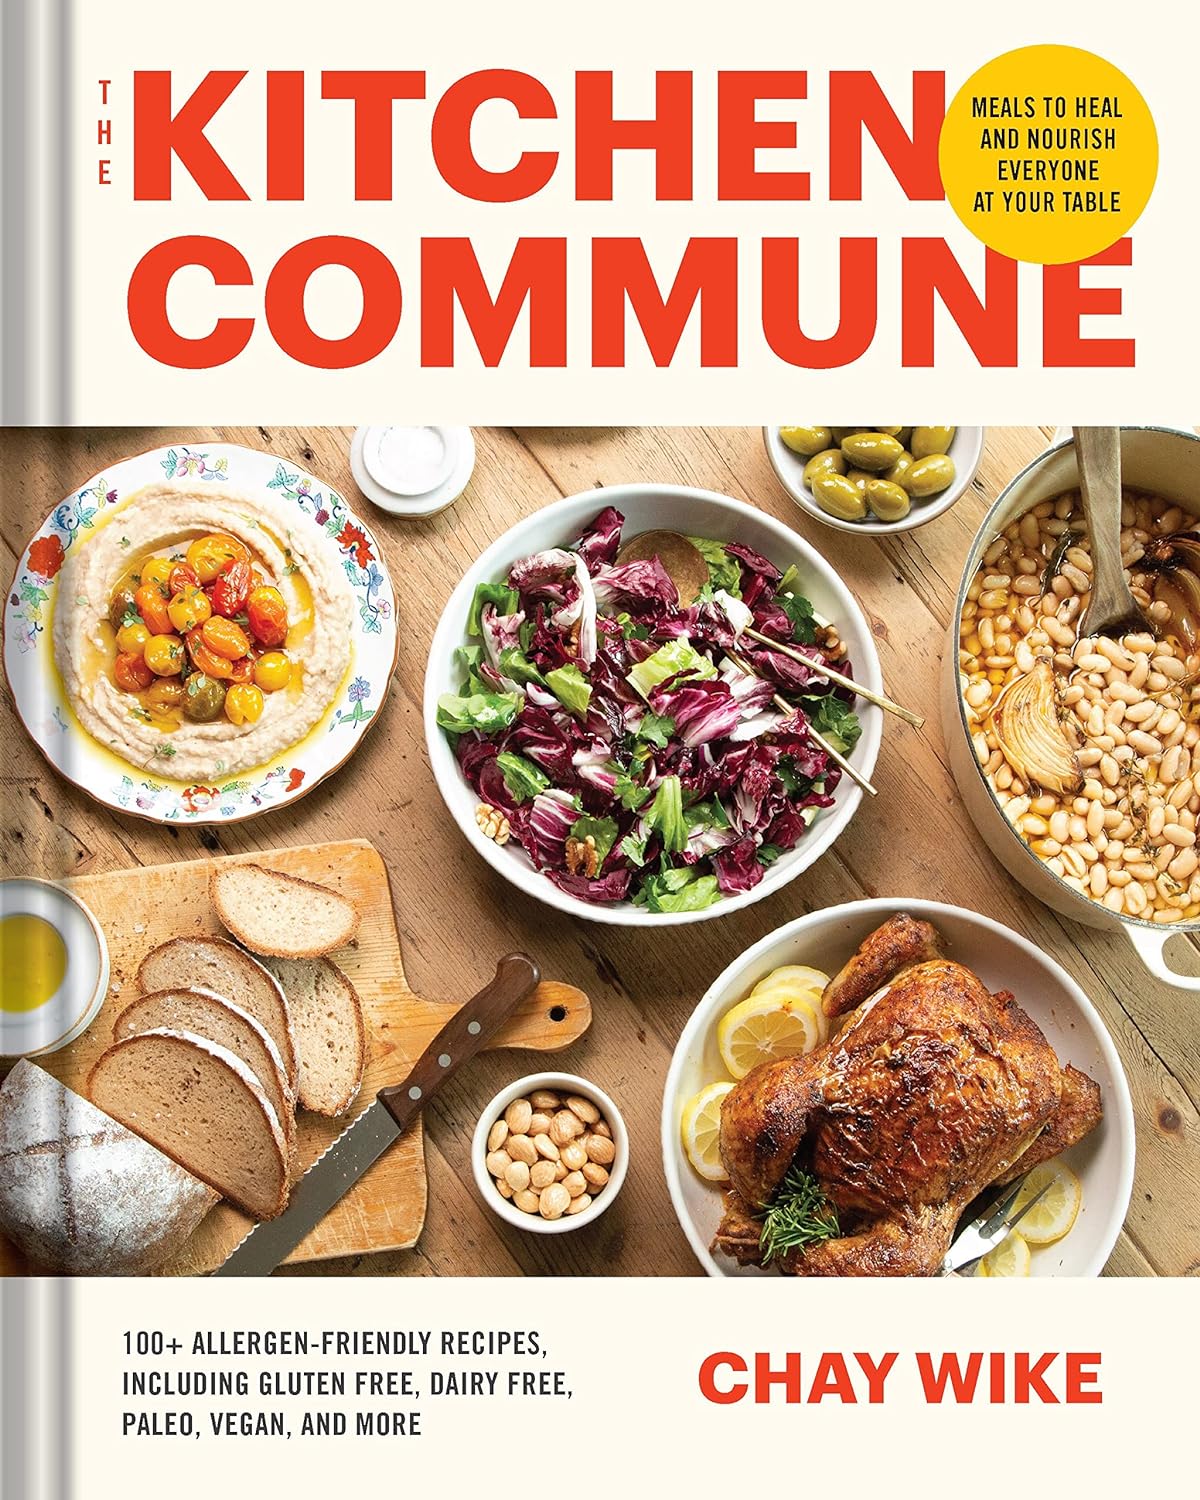 The Kitchen Commune: Meals to Heal and Nourish Everyone at Your Table (Chay Wike) *Signed*